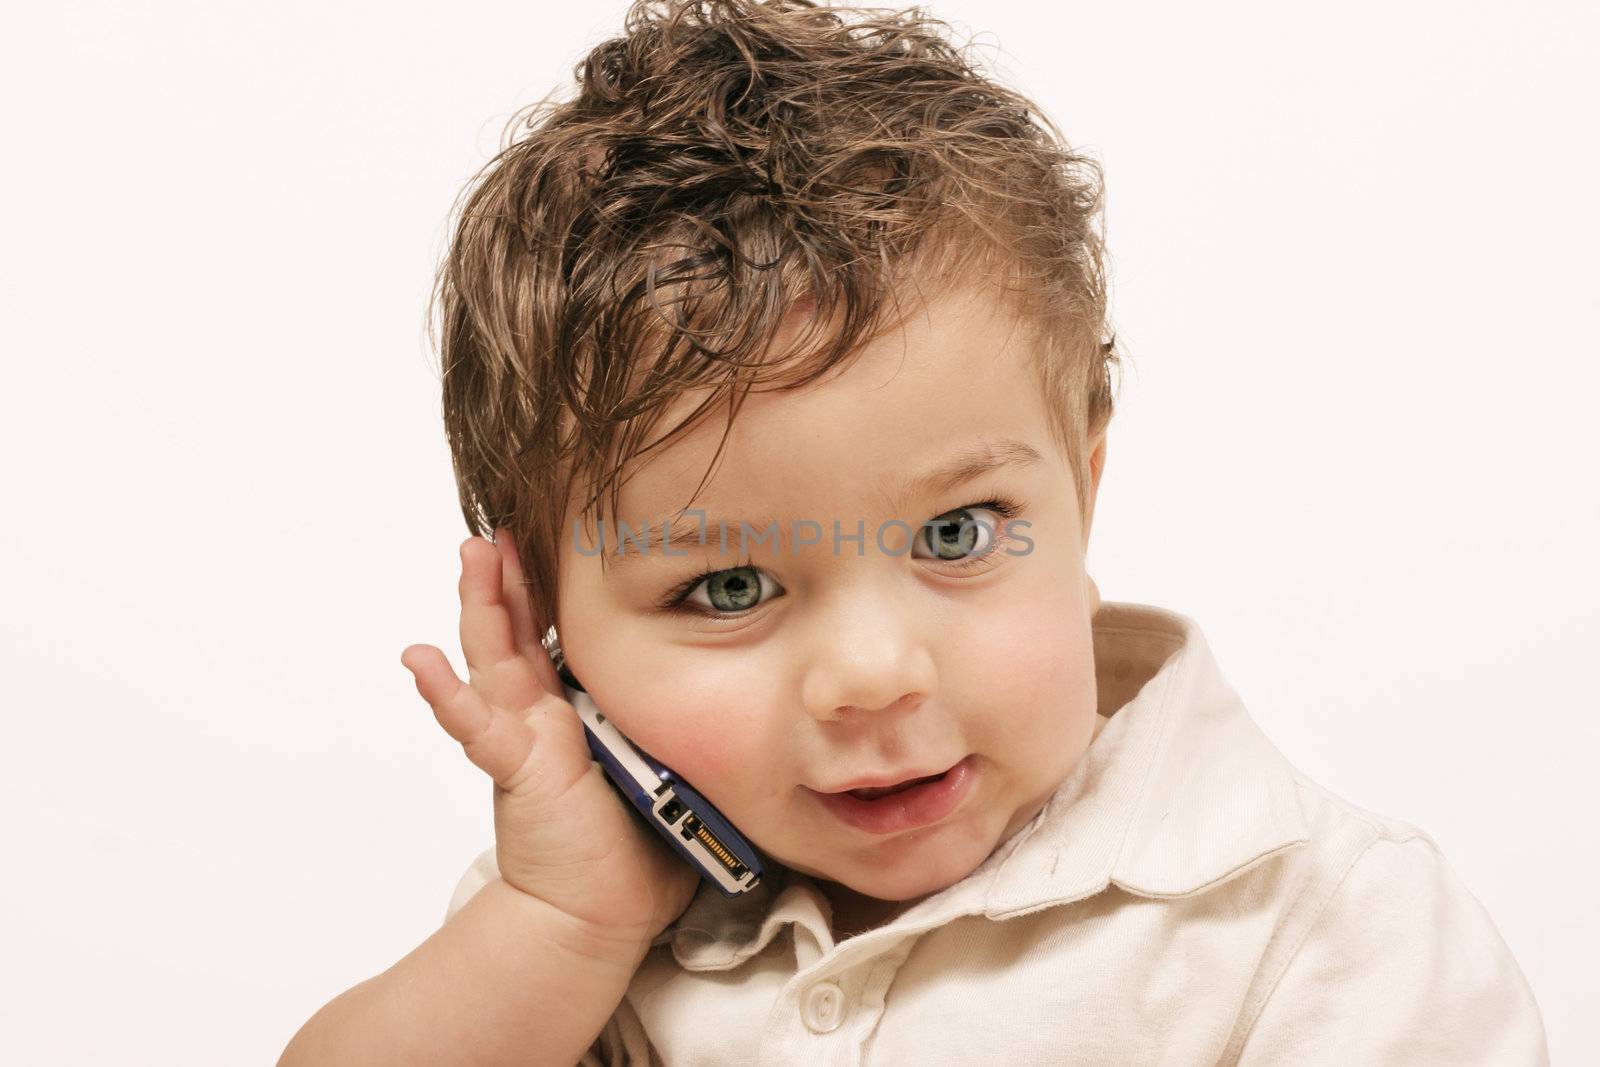 Toddler Talking on Phone by lovleah